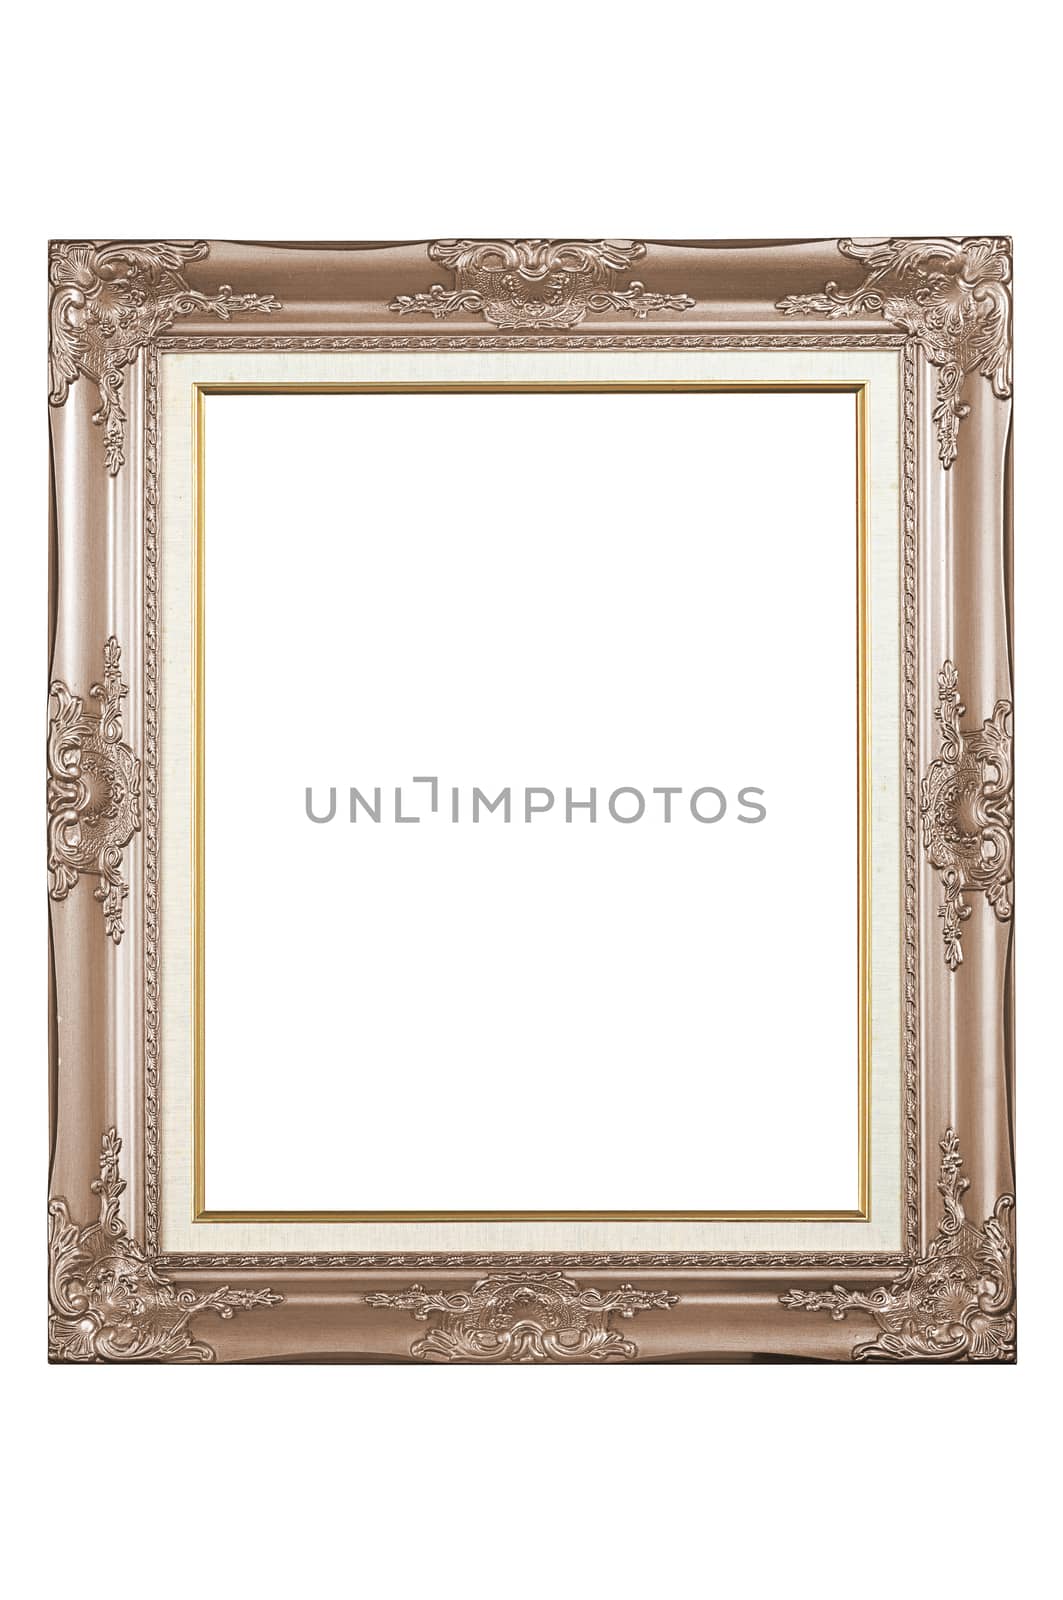 Antique wooden frame isolated on white background 